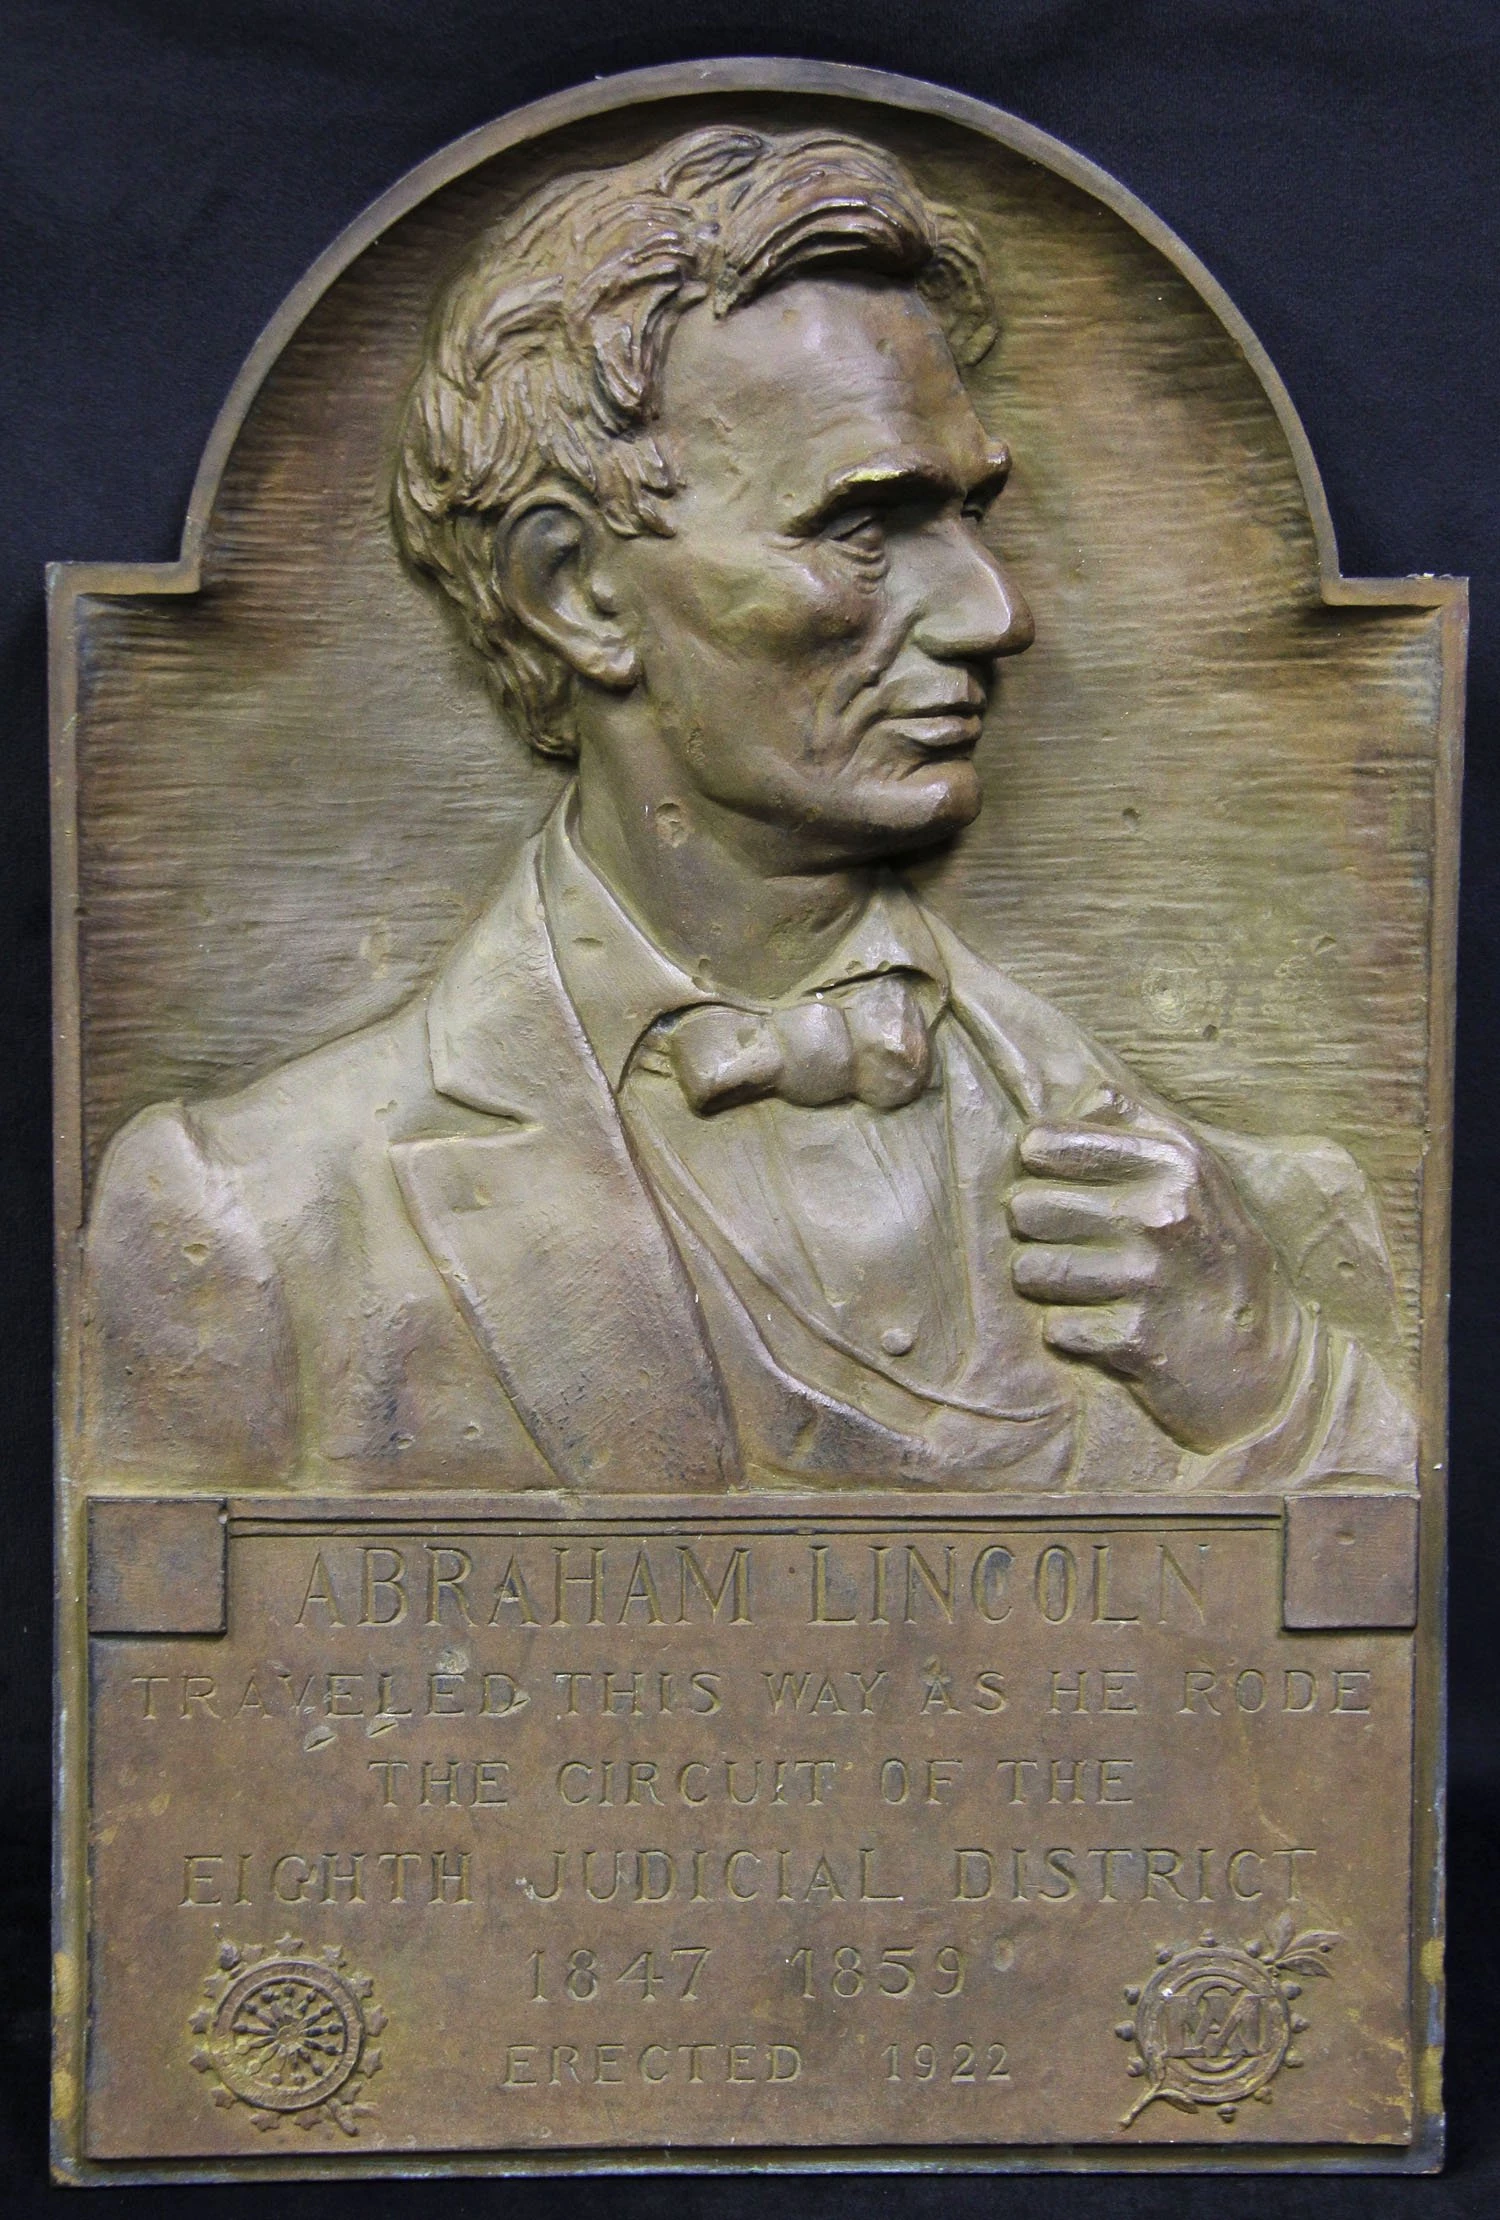 A bronze bas-relief sculpture of the right profile of Abraham Lincoln's face. He is looking to the left, and his left hand is tucked around, holding the collar of his jacket. Below the depiction of Lincoln reads abraham lincoln traveled this way as he rode the circuit of 8th judicial district 1847 1859. erected 1922